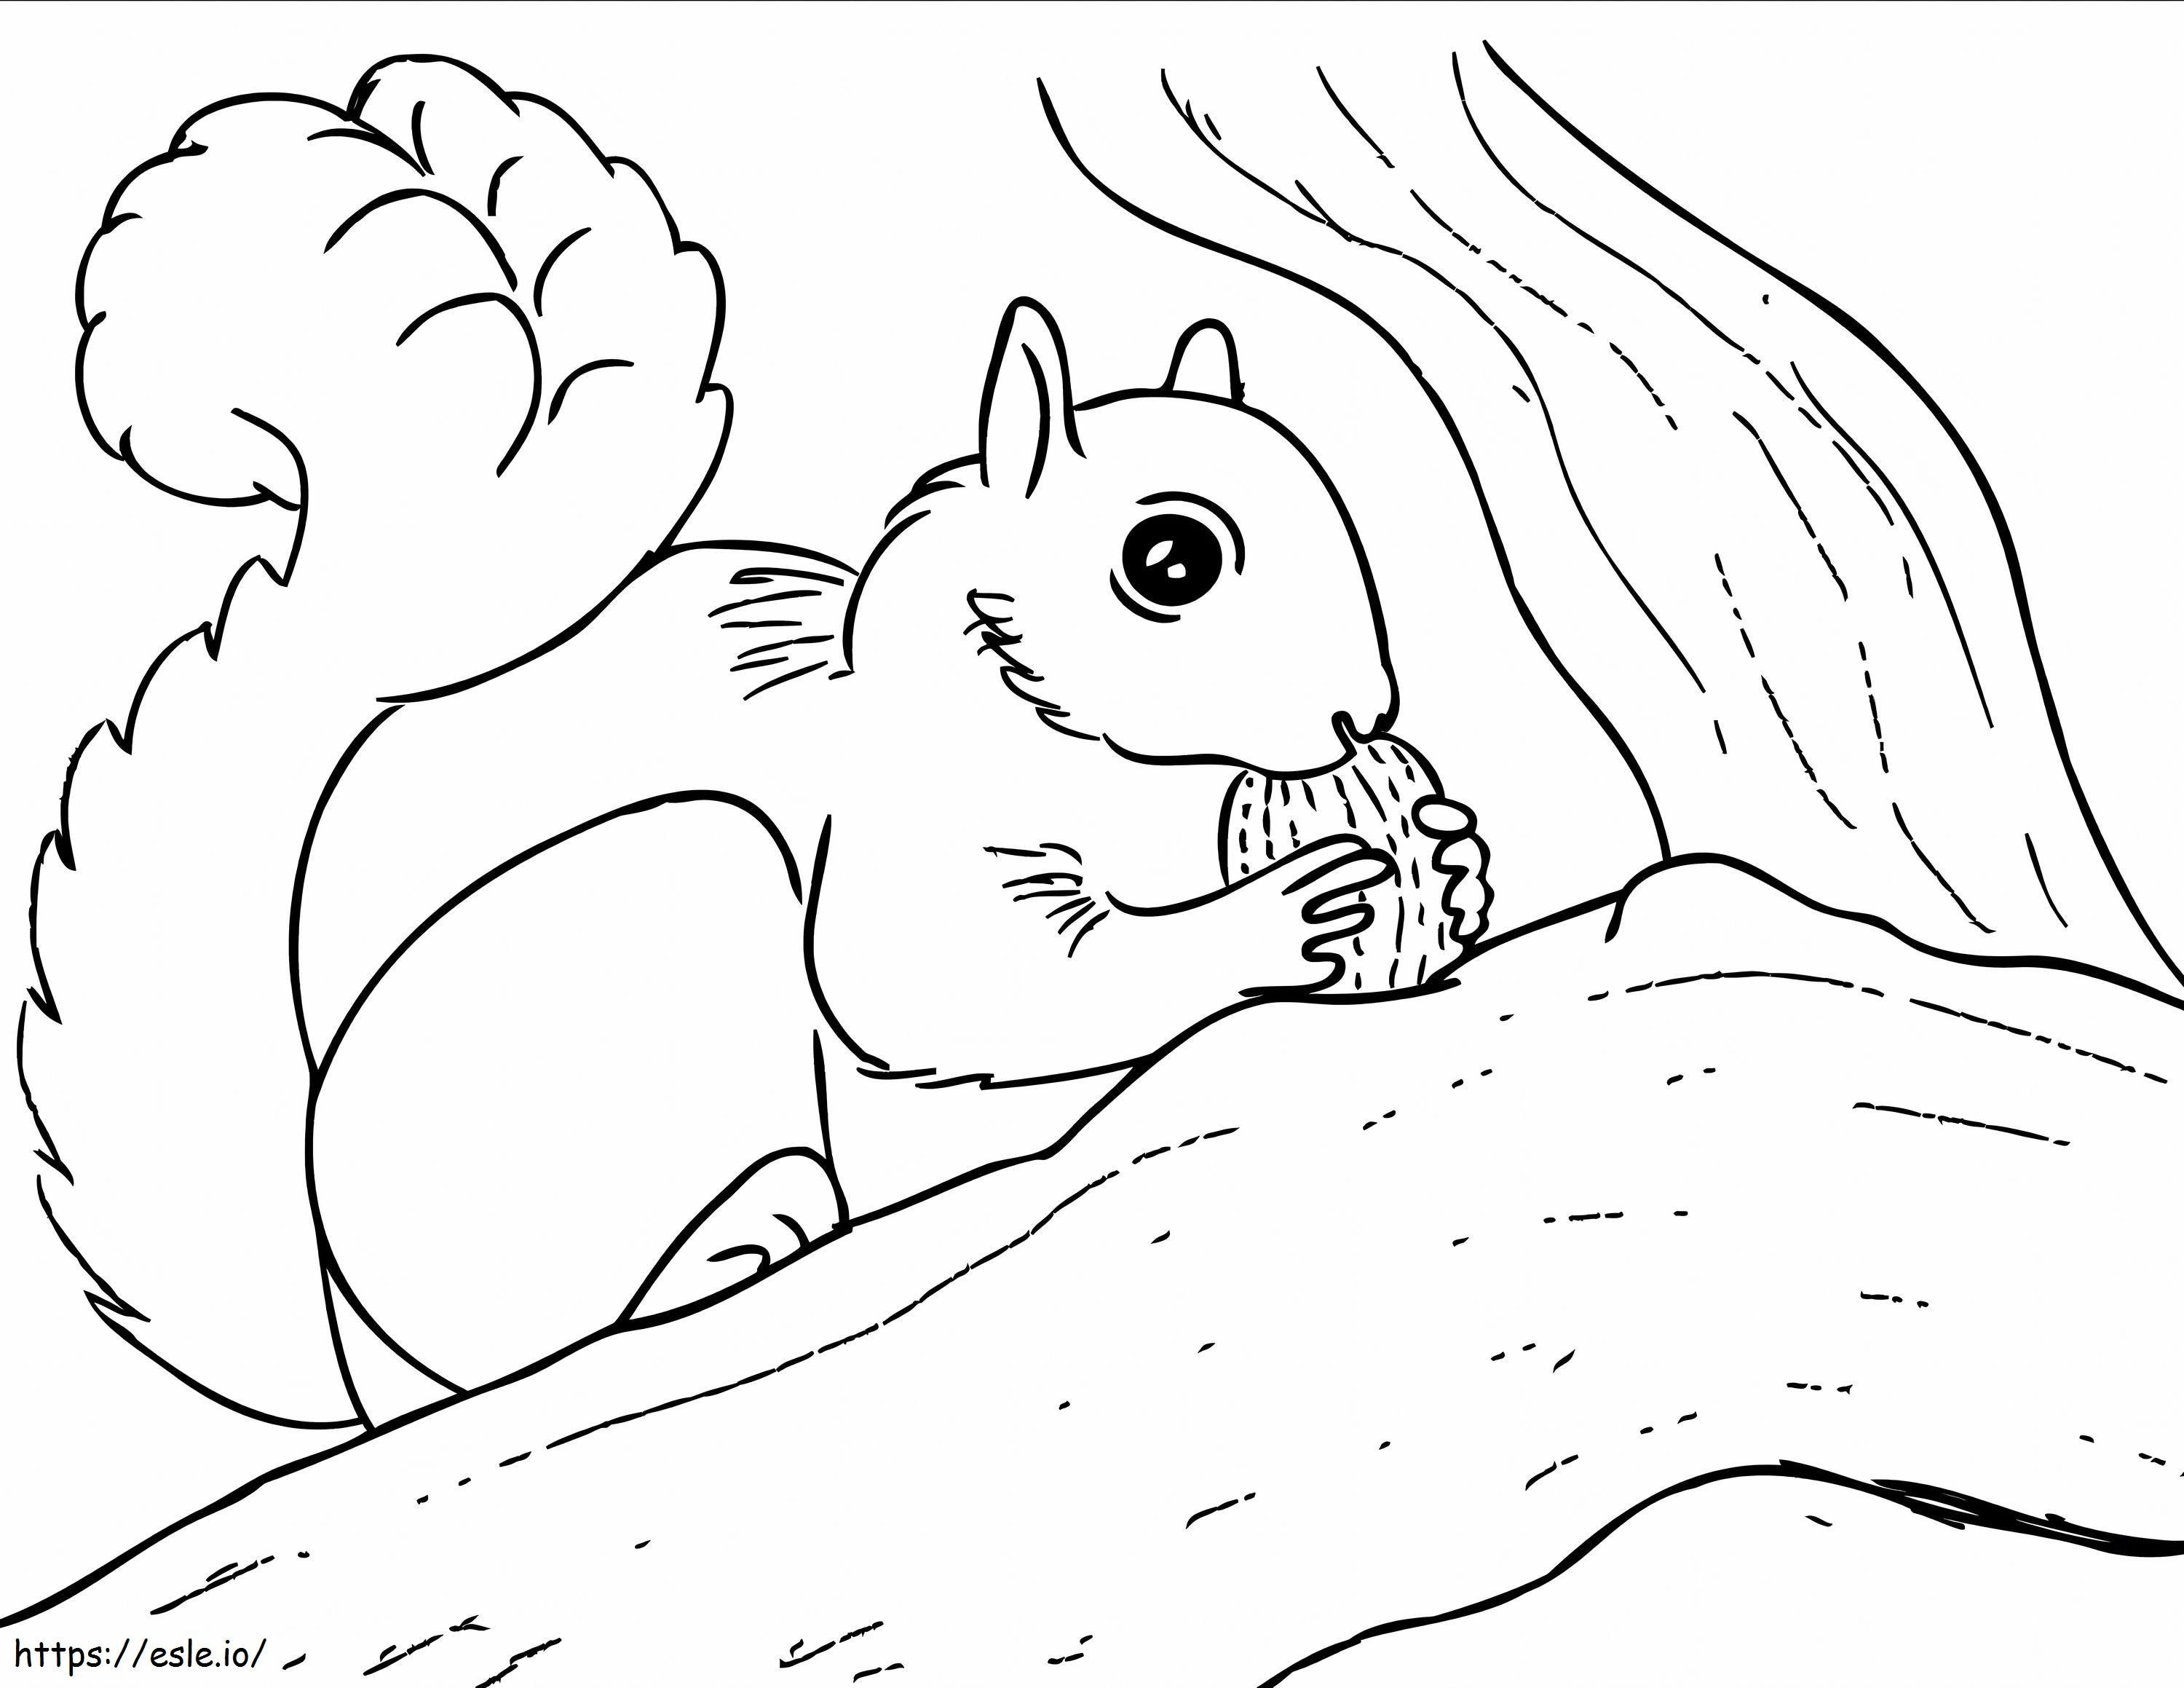 Squirrel Eating Acorn 1 coloring page